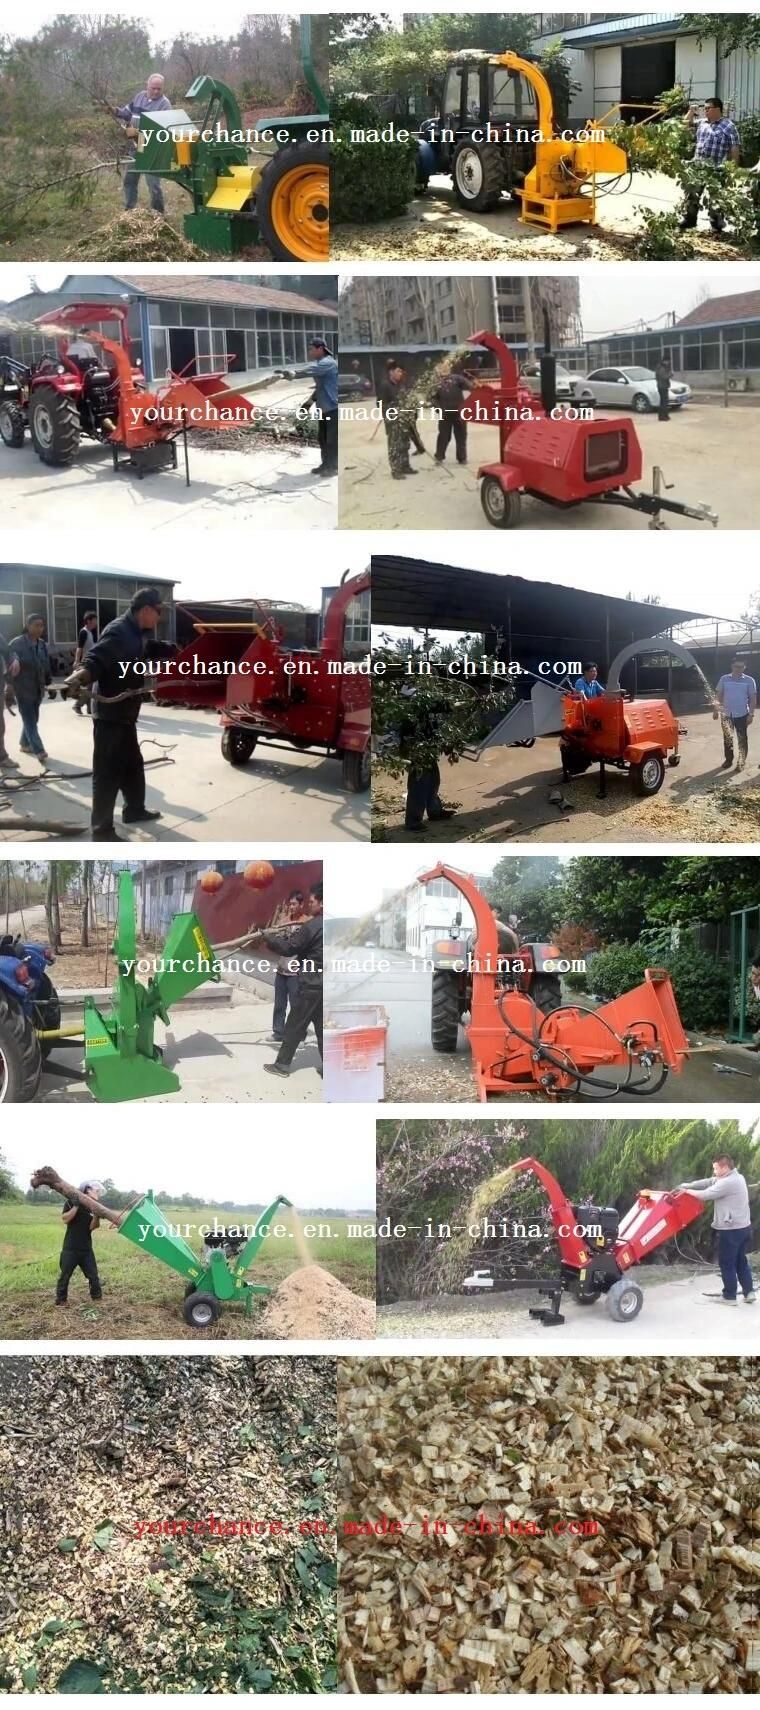 Hot Sale Factory Supplier Wc-30 Towable 30HP 8 Inch Selfpower Wood Chipper Shredder with Hydraulic Feeding System